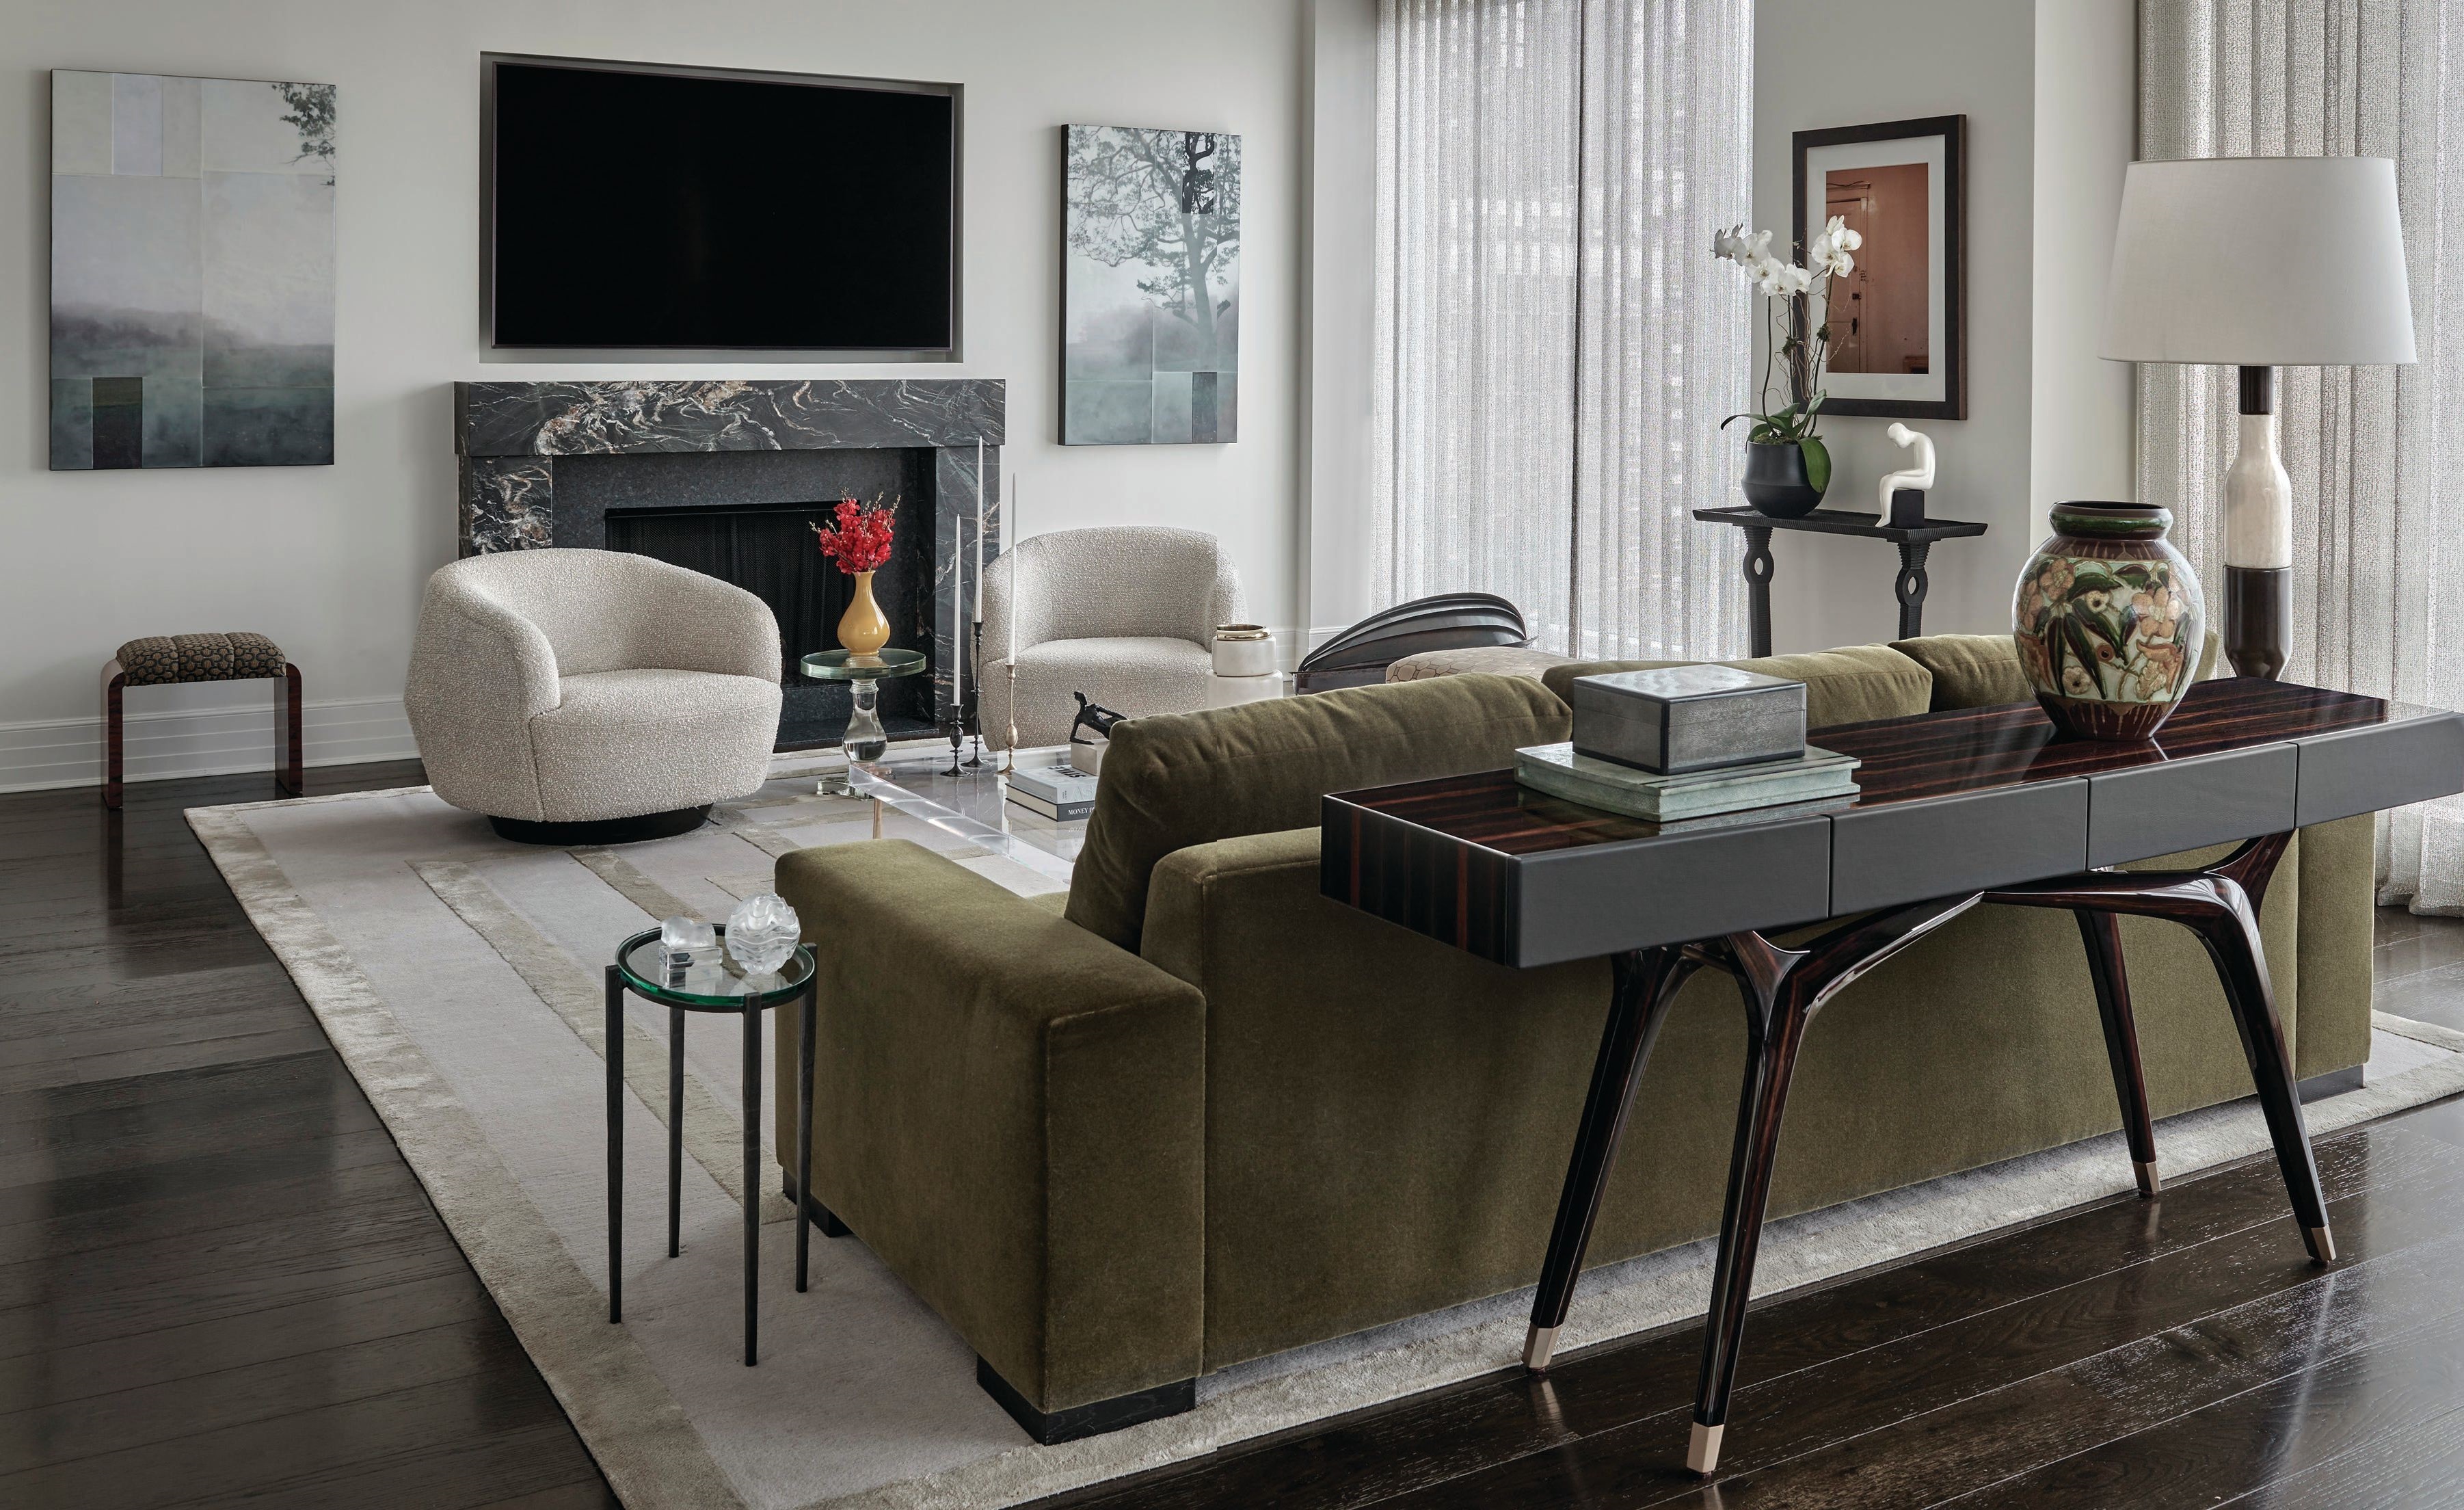 In the living room, a sofa by Yung Atelier upholstered in Pierre Frey mohair in Bold Army and a pair of Sumo armchairs by Holly Hunt in Métaphores Toundra Sable fabric draw immediate attention.  PHOTOGRAPHED BY TONY SOLURI